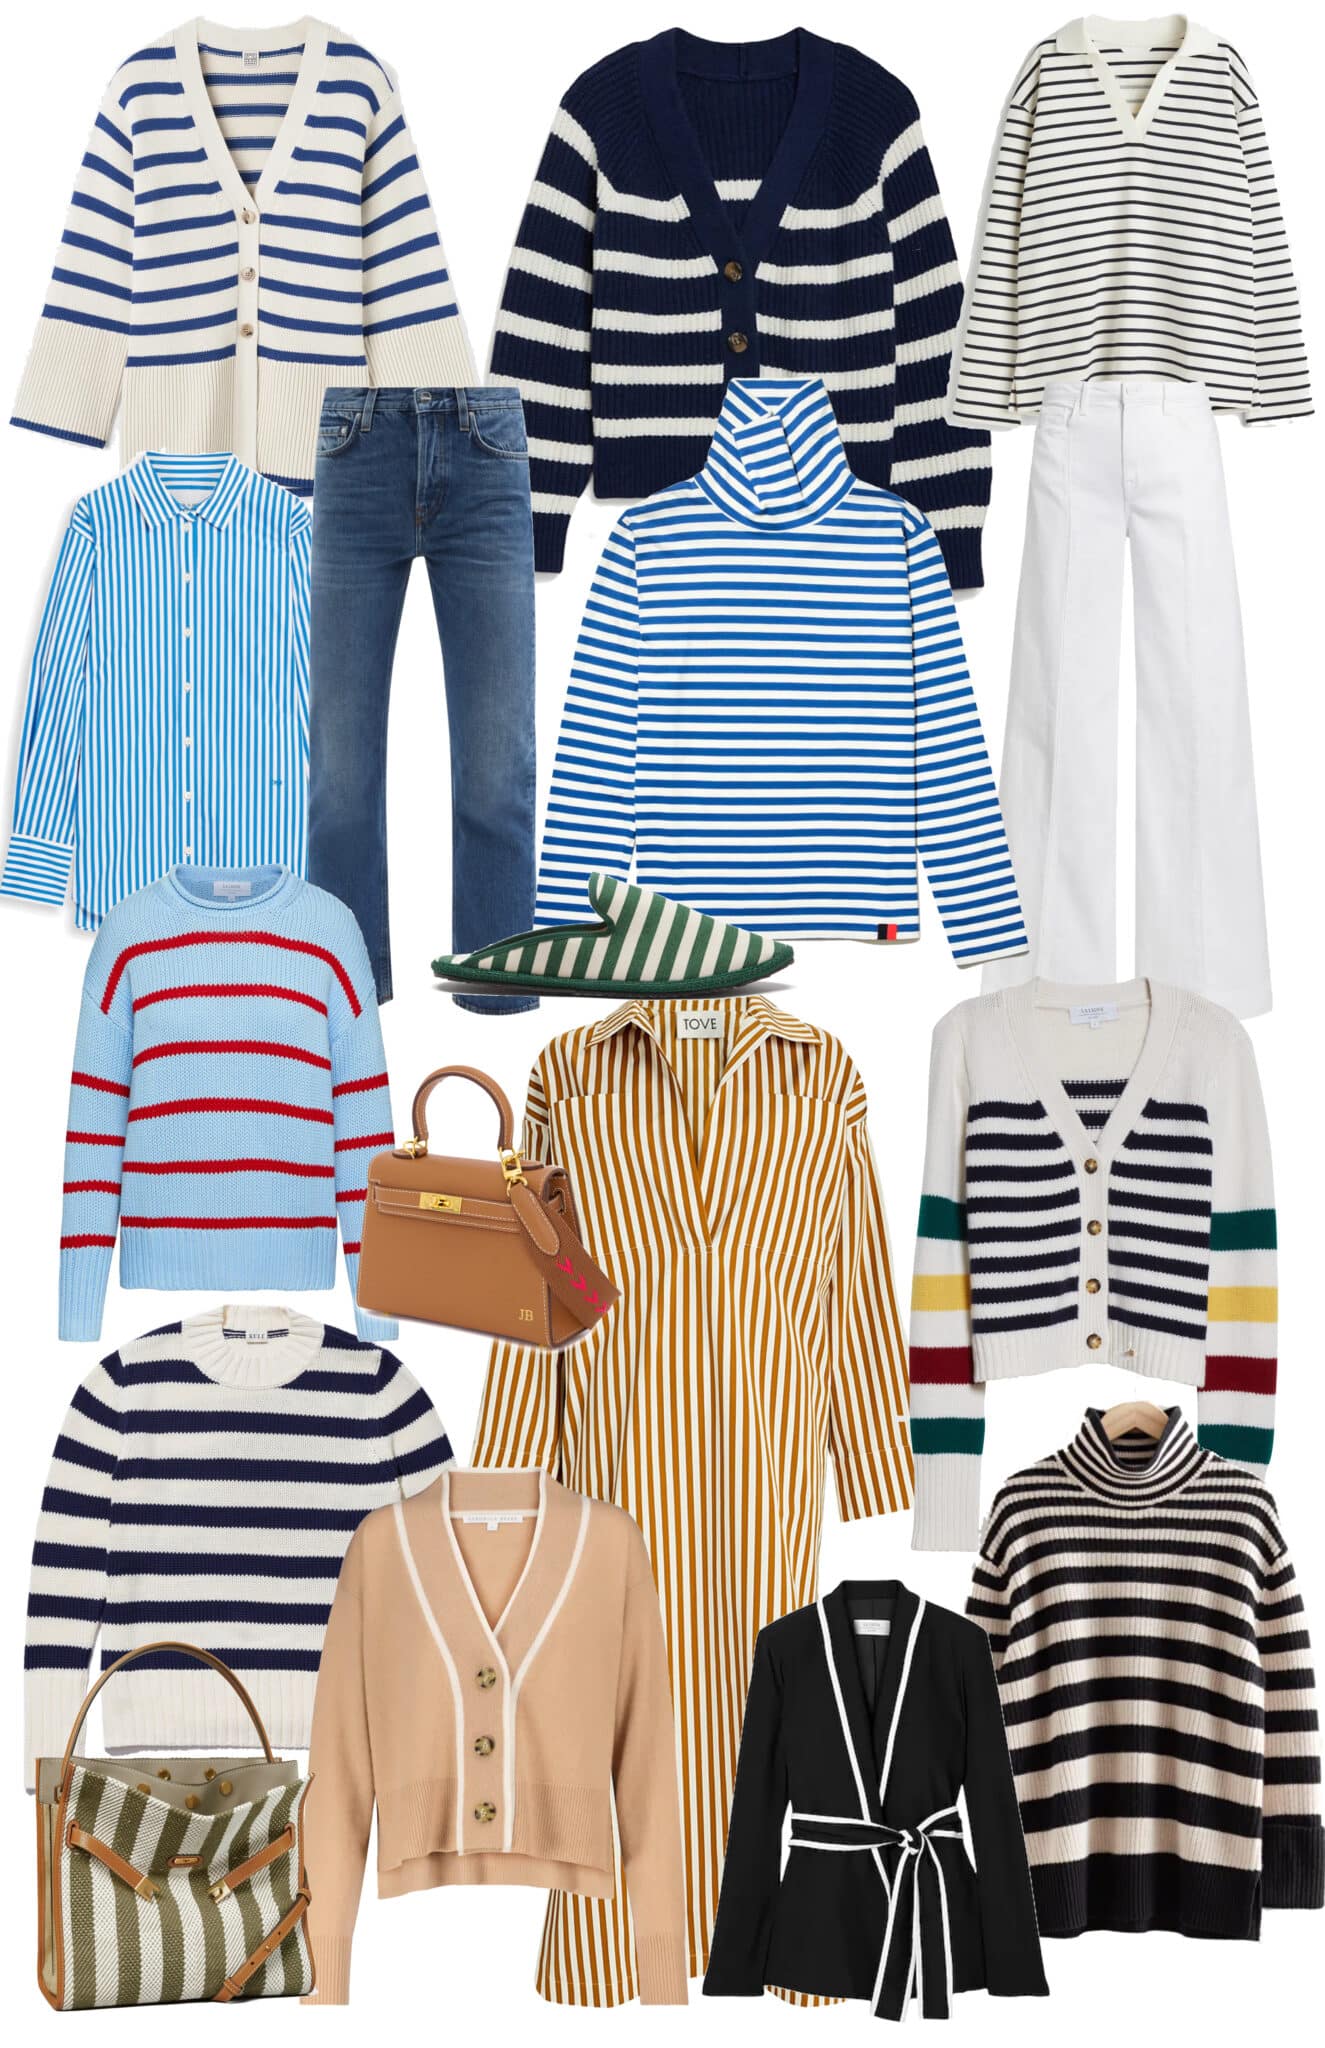 STRIPED FINDS FOR FALL